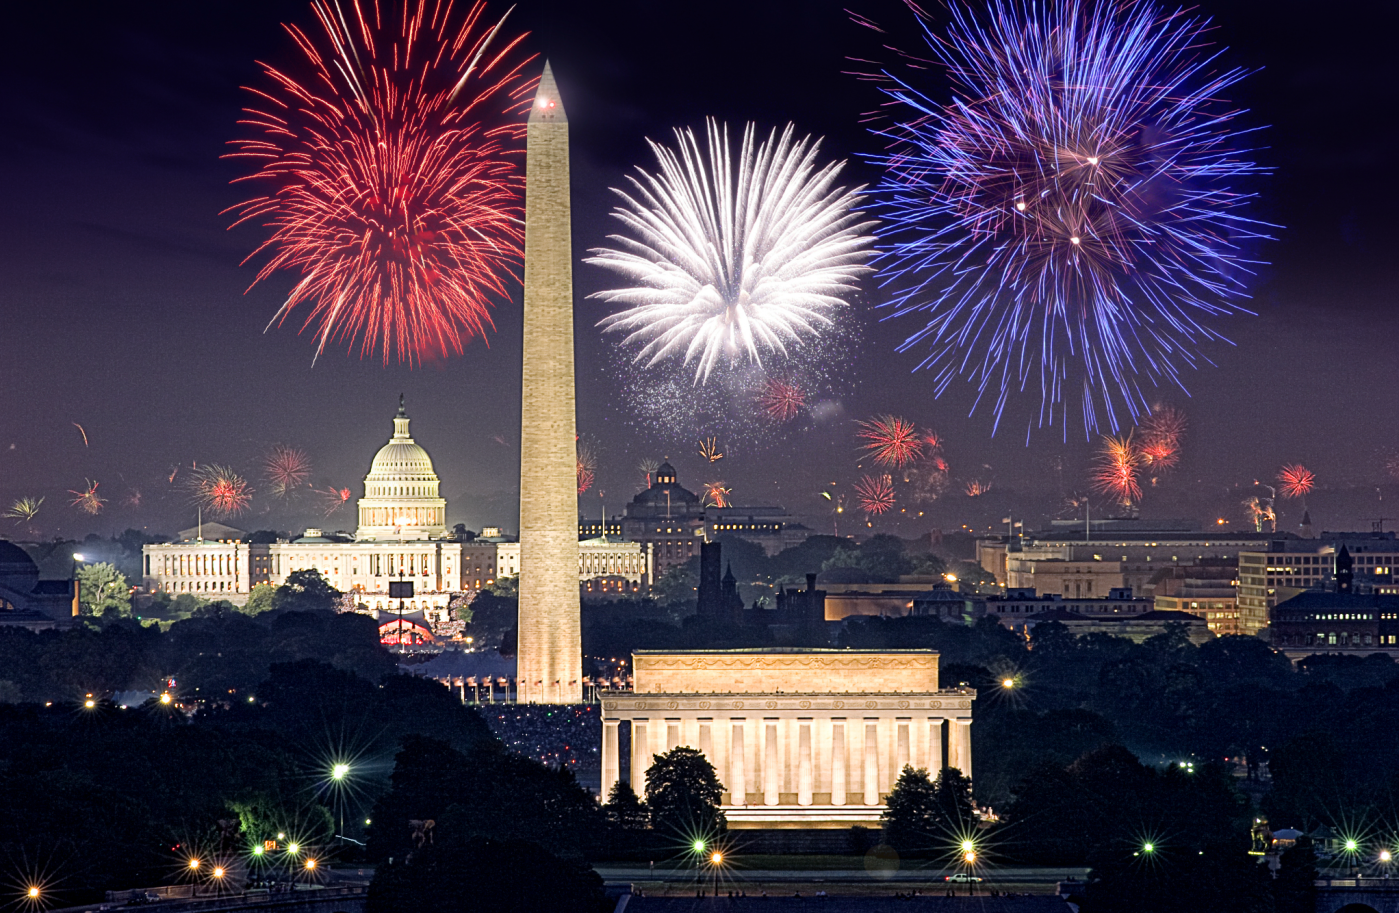 PBS’ A Capitol Fourth will be broadcasting live from Washington, D.C. on July 4